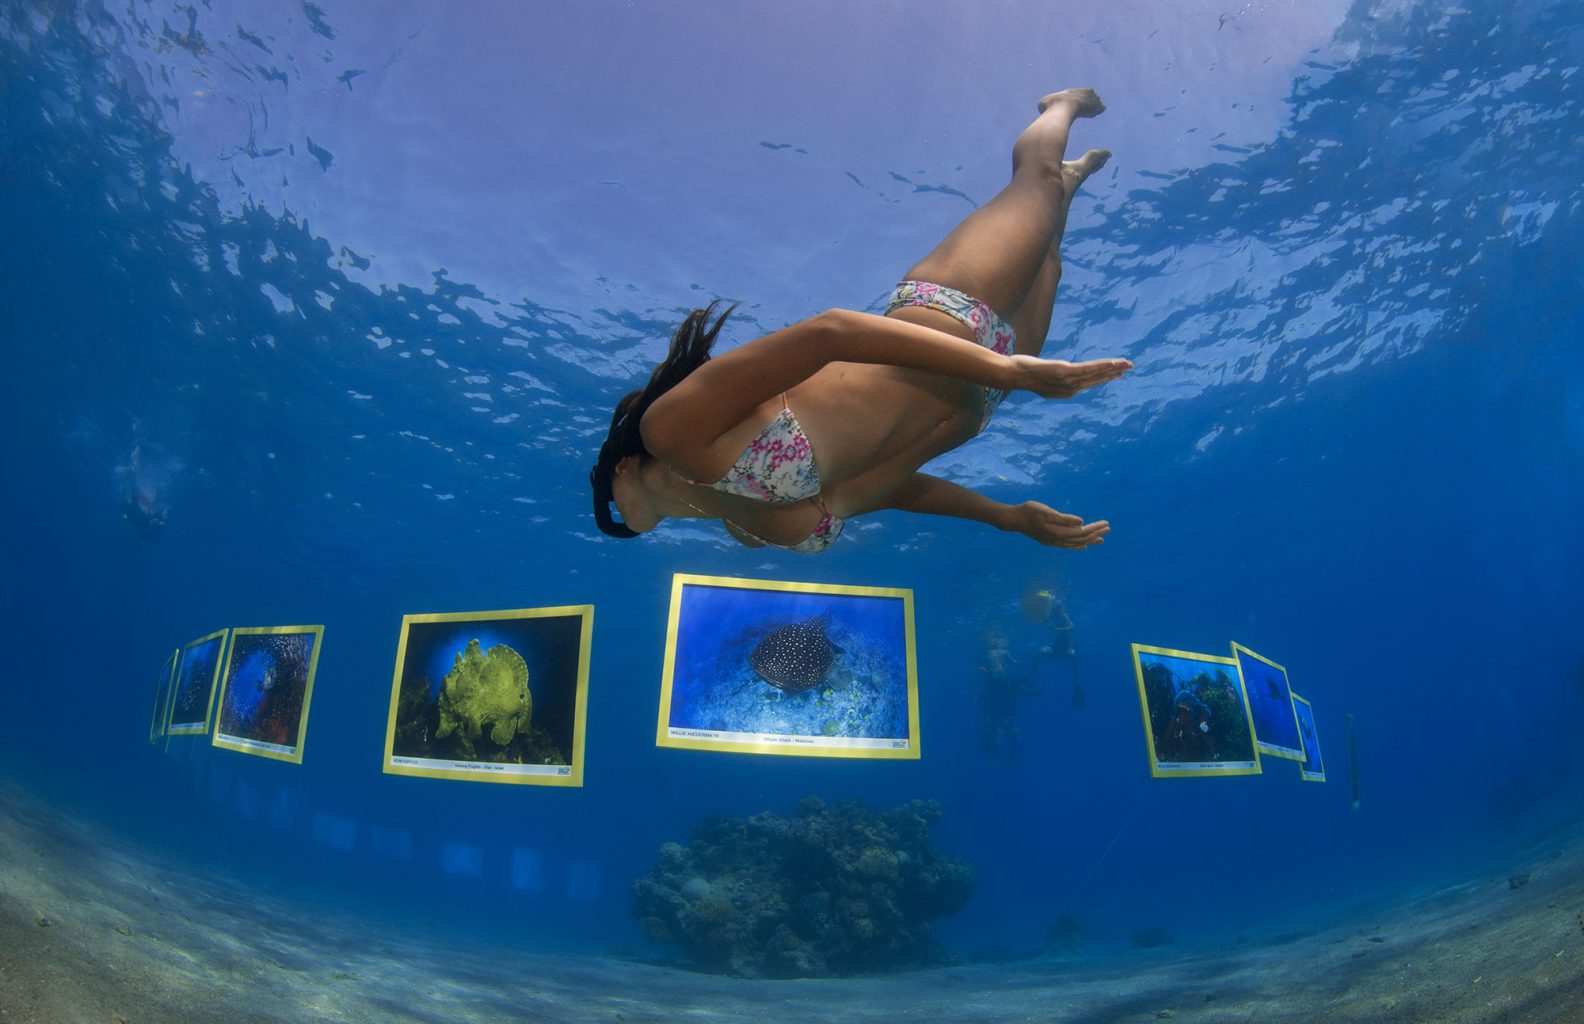 Treasures of the Sea Underwater Picture Exhibition, Red Sea - Eilat, Israel